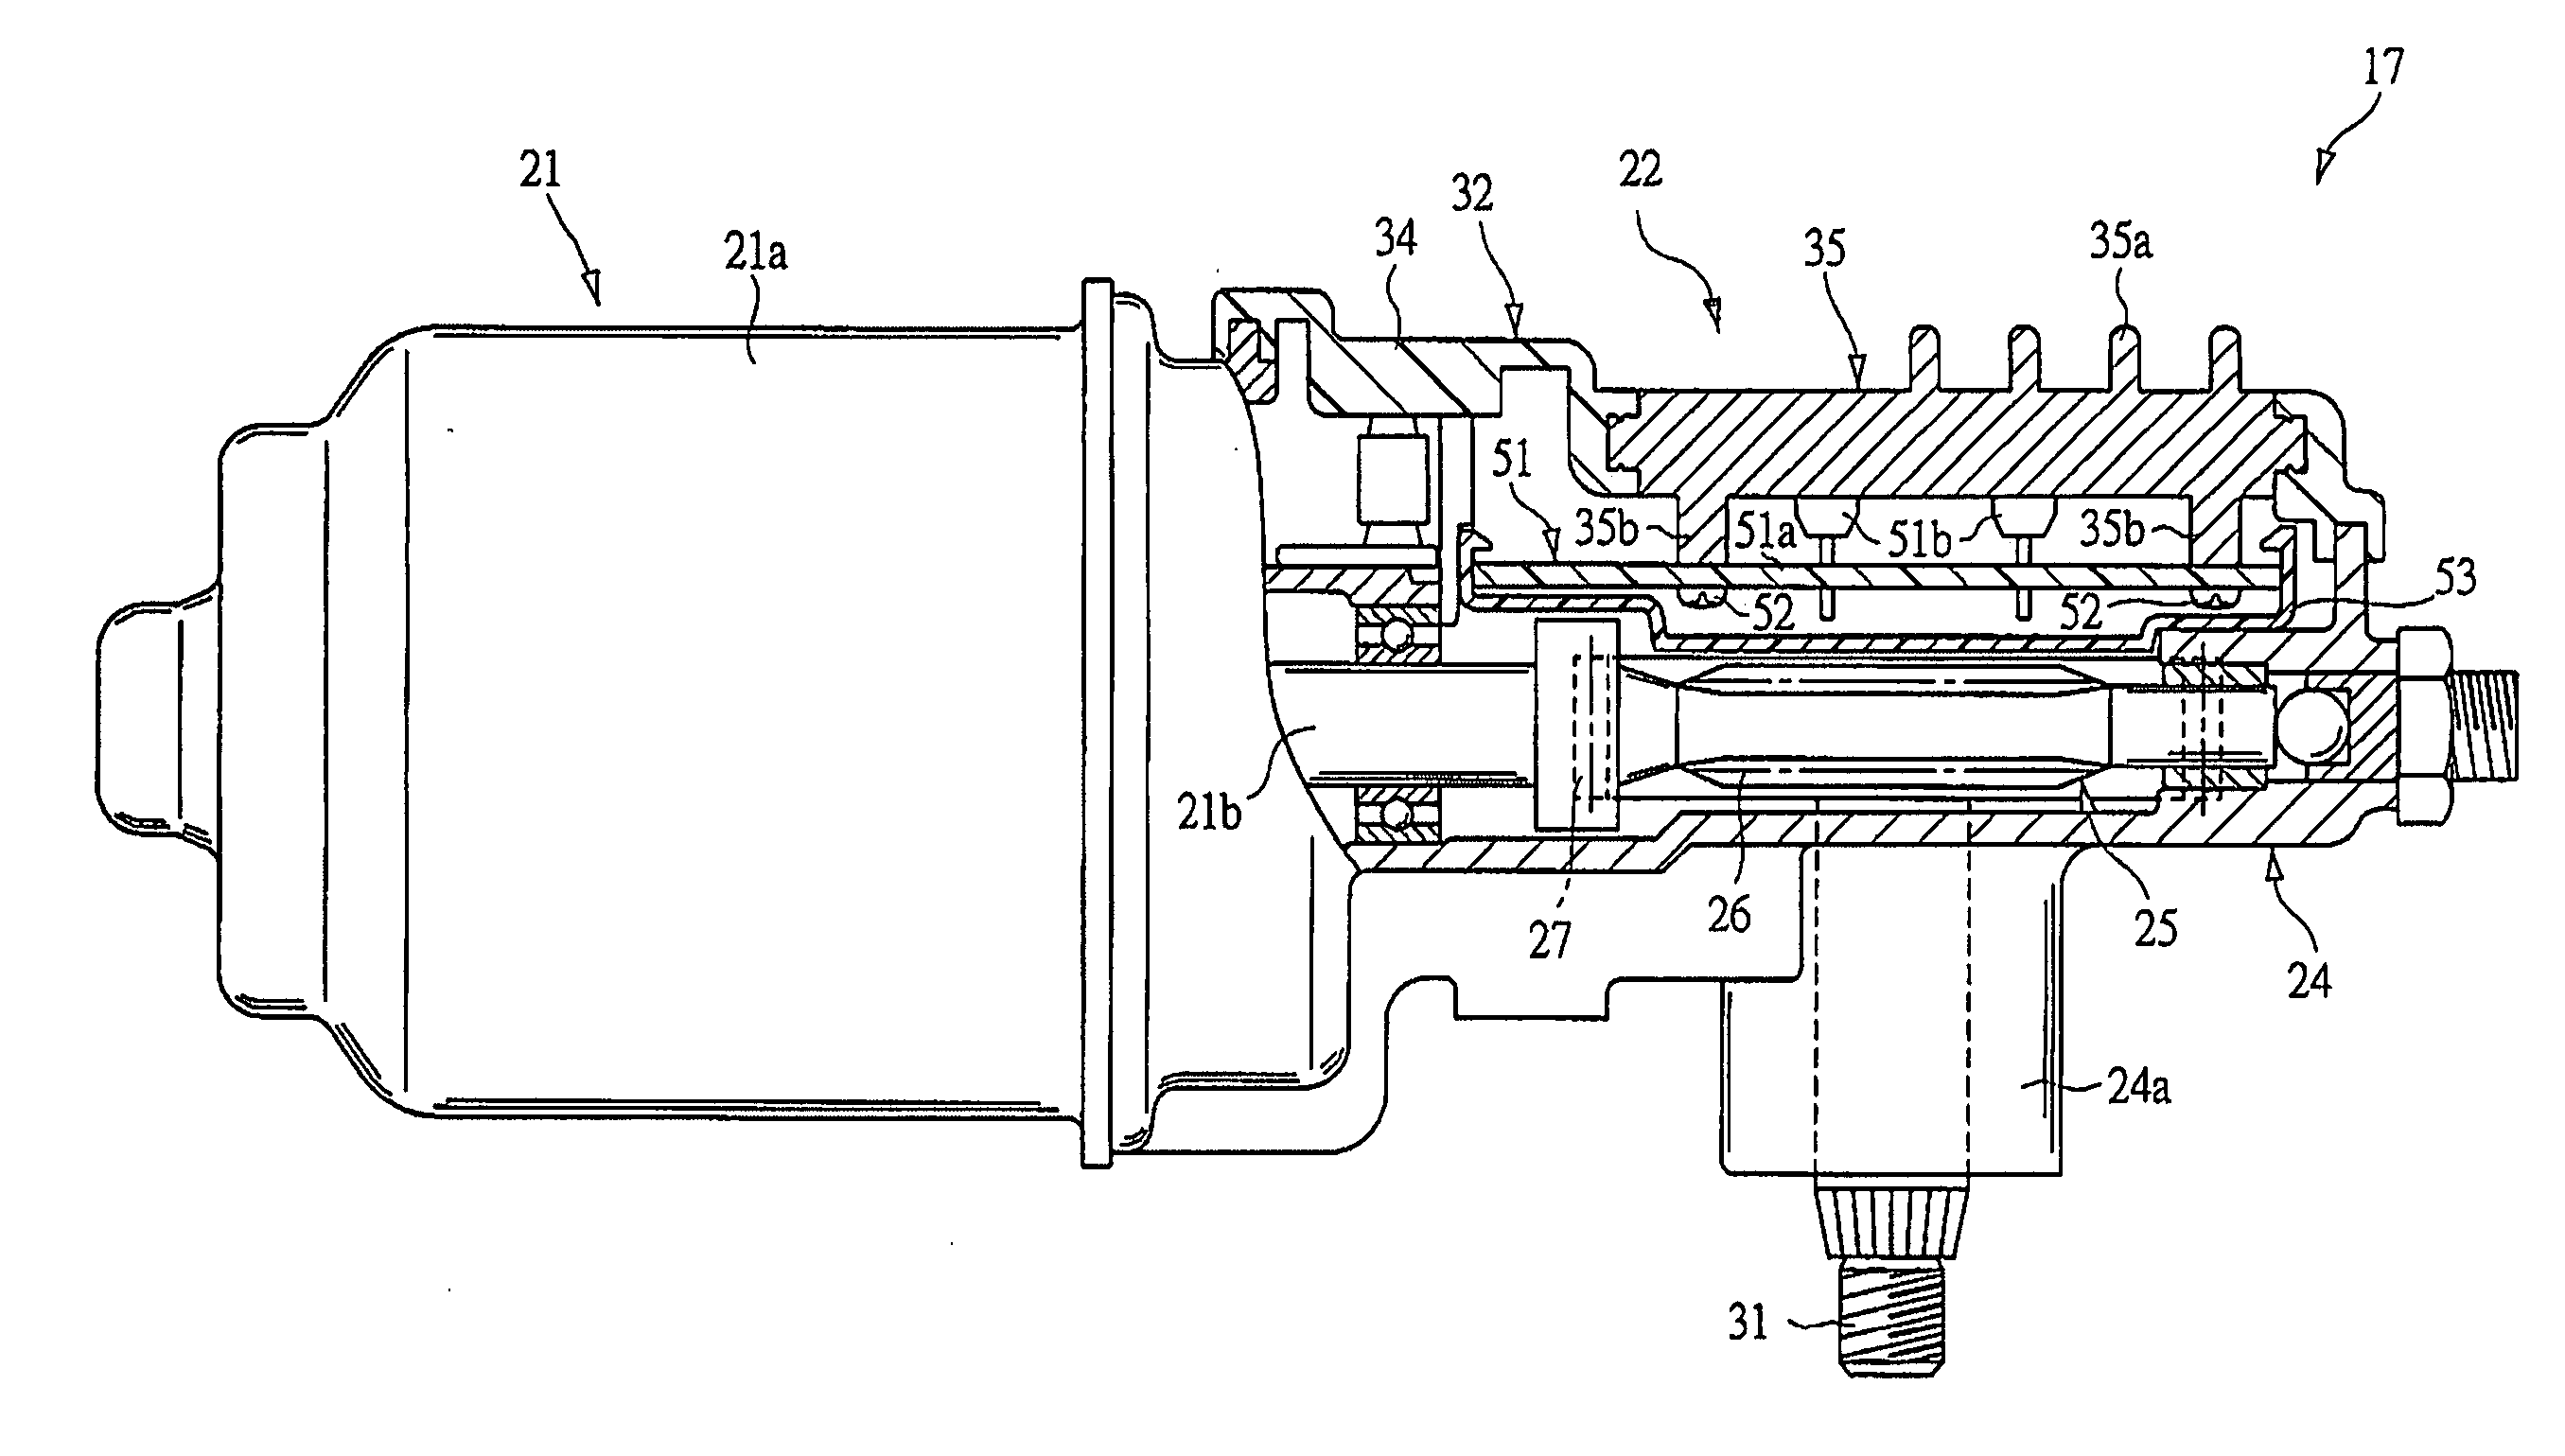 Motor cover and electric motor equipped with the same